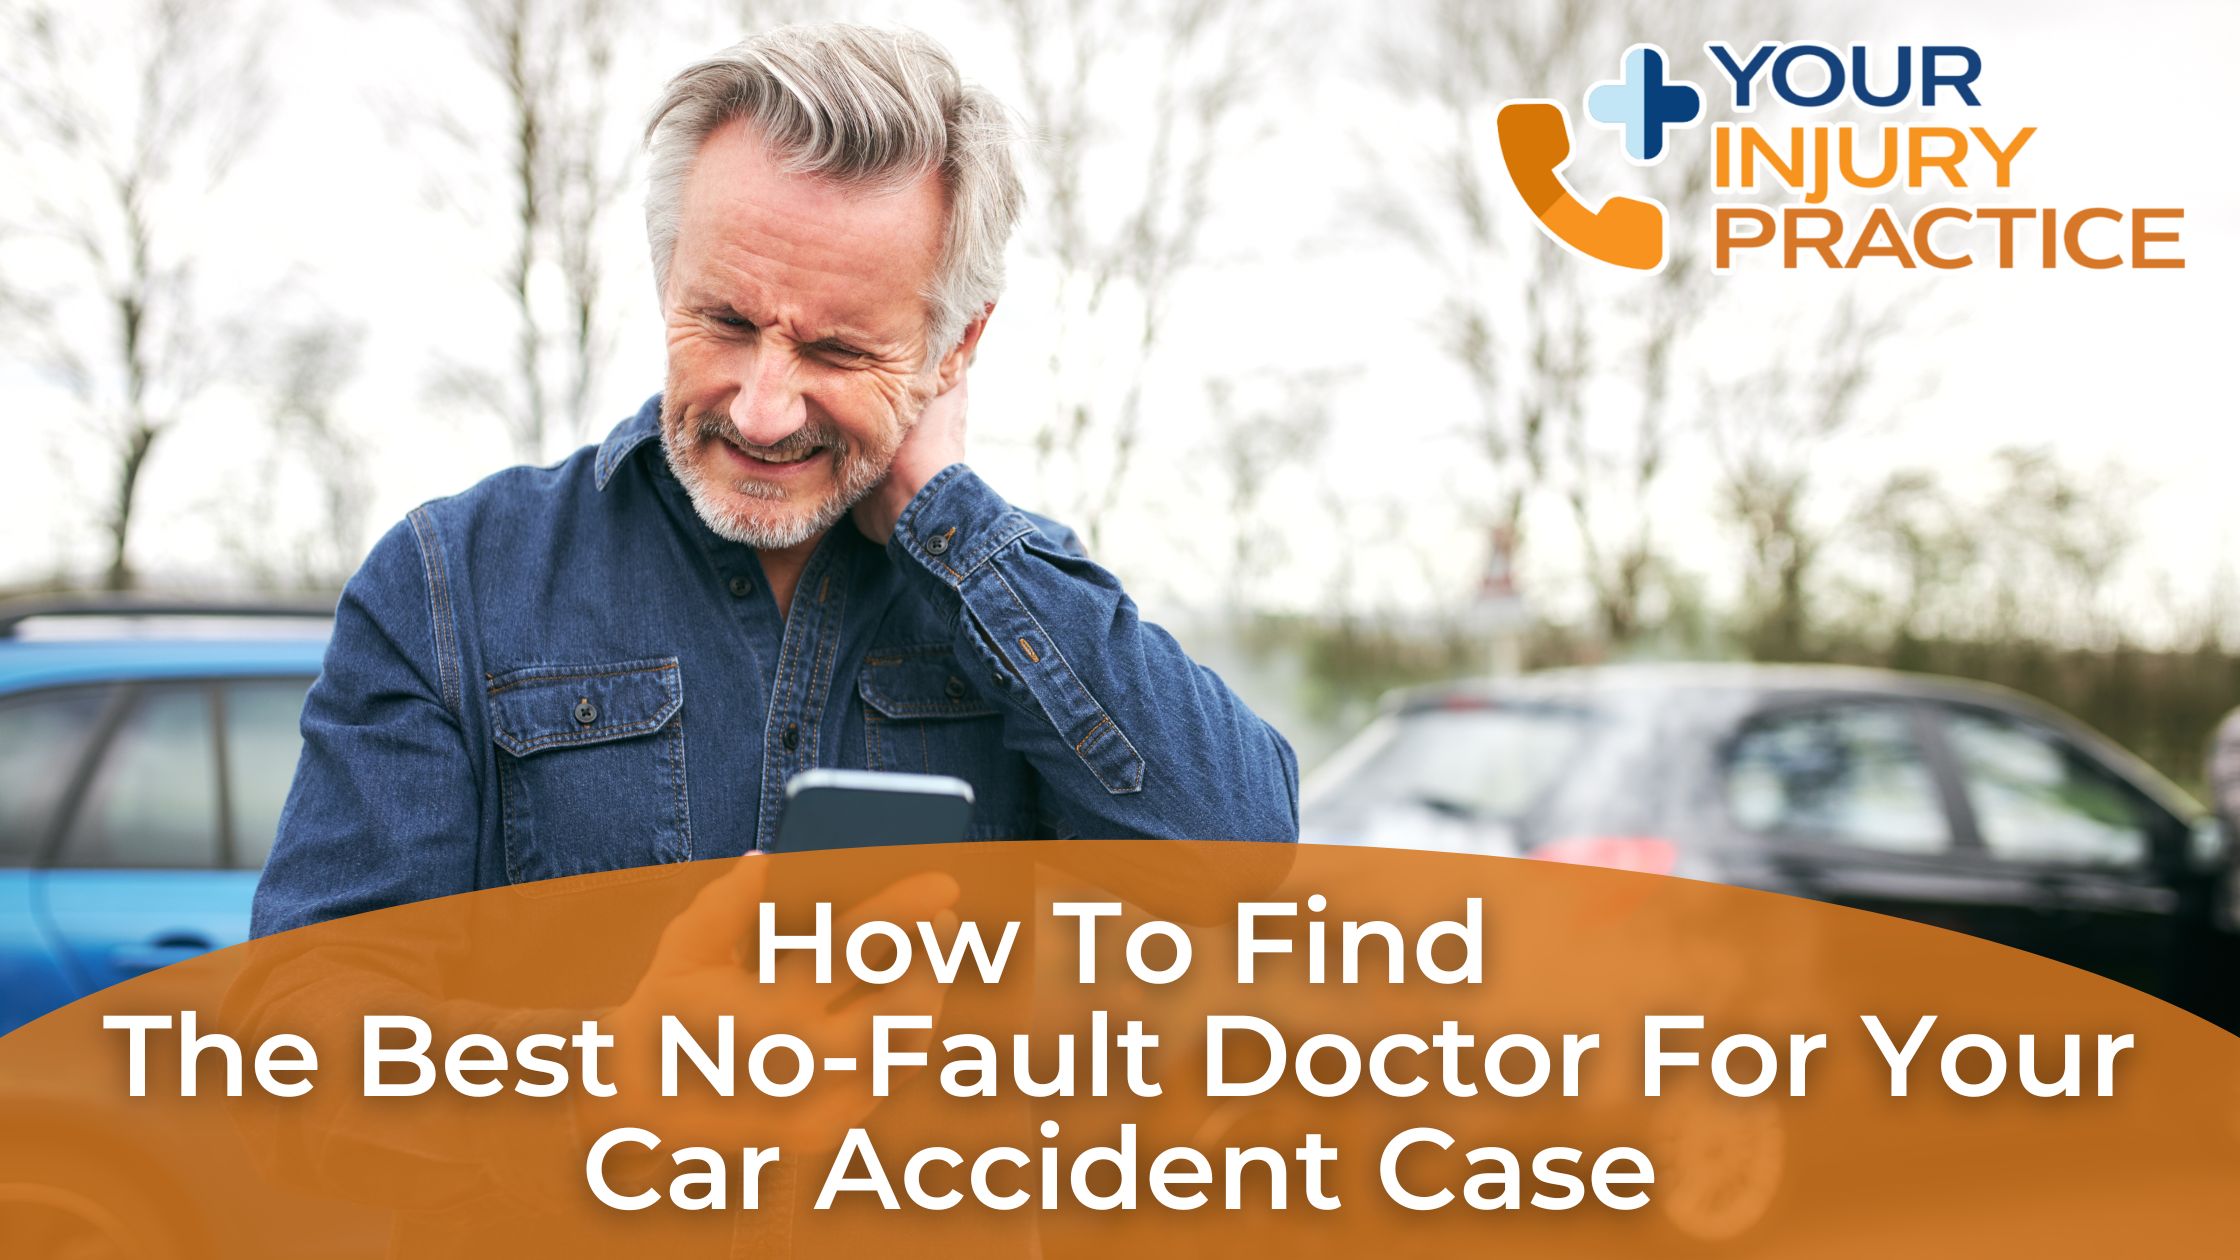 How to Find the Best No-Fault Doctor for Your Car Accident Case